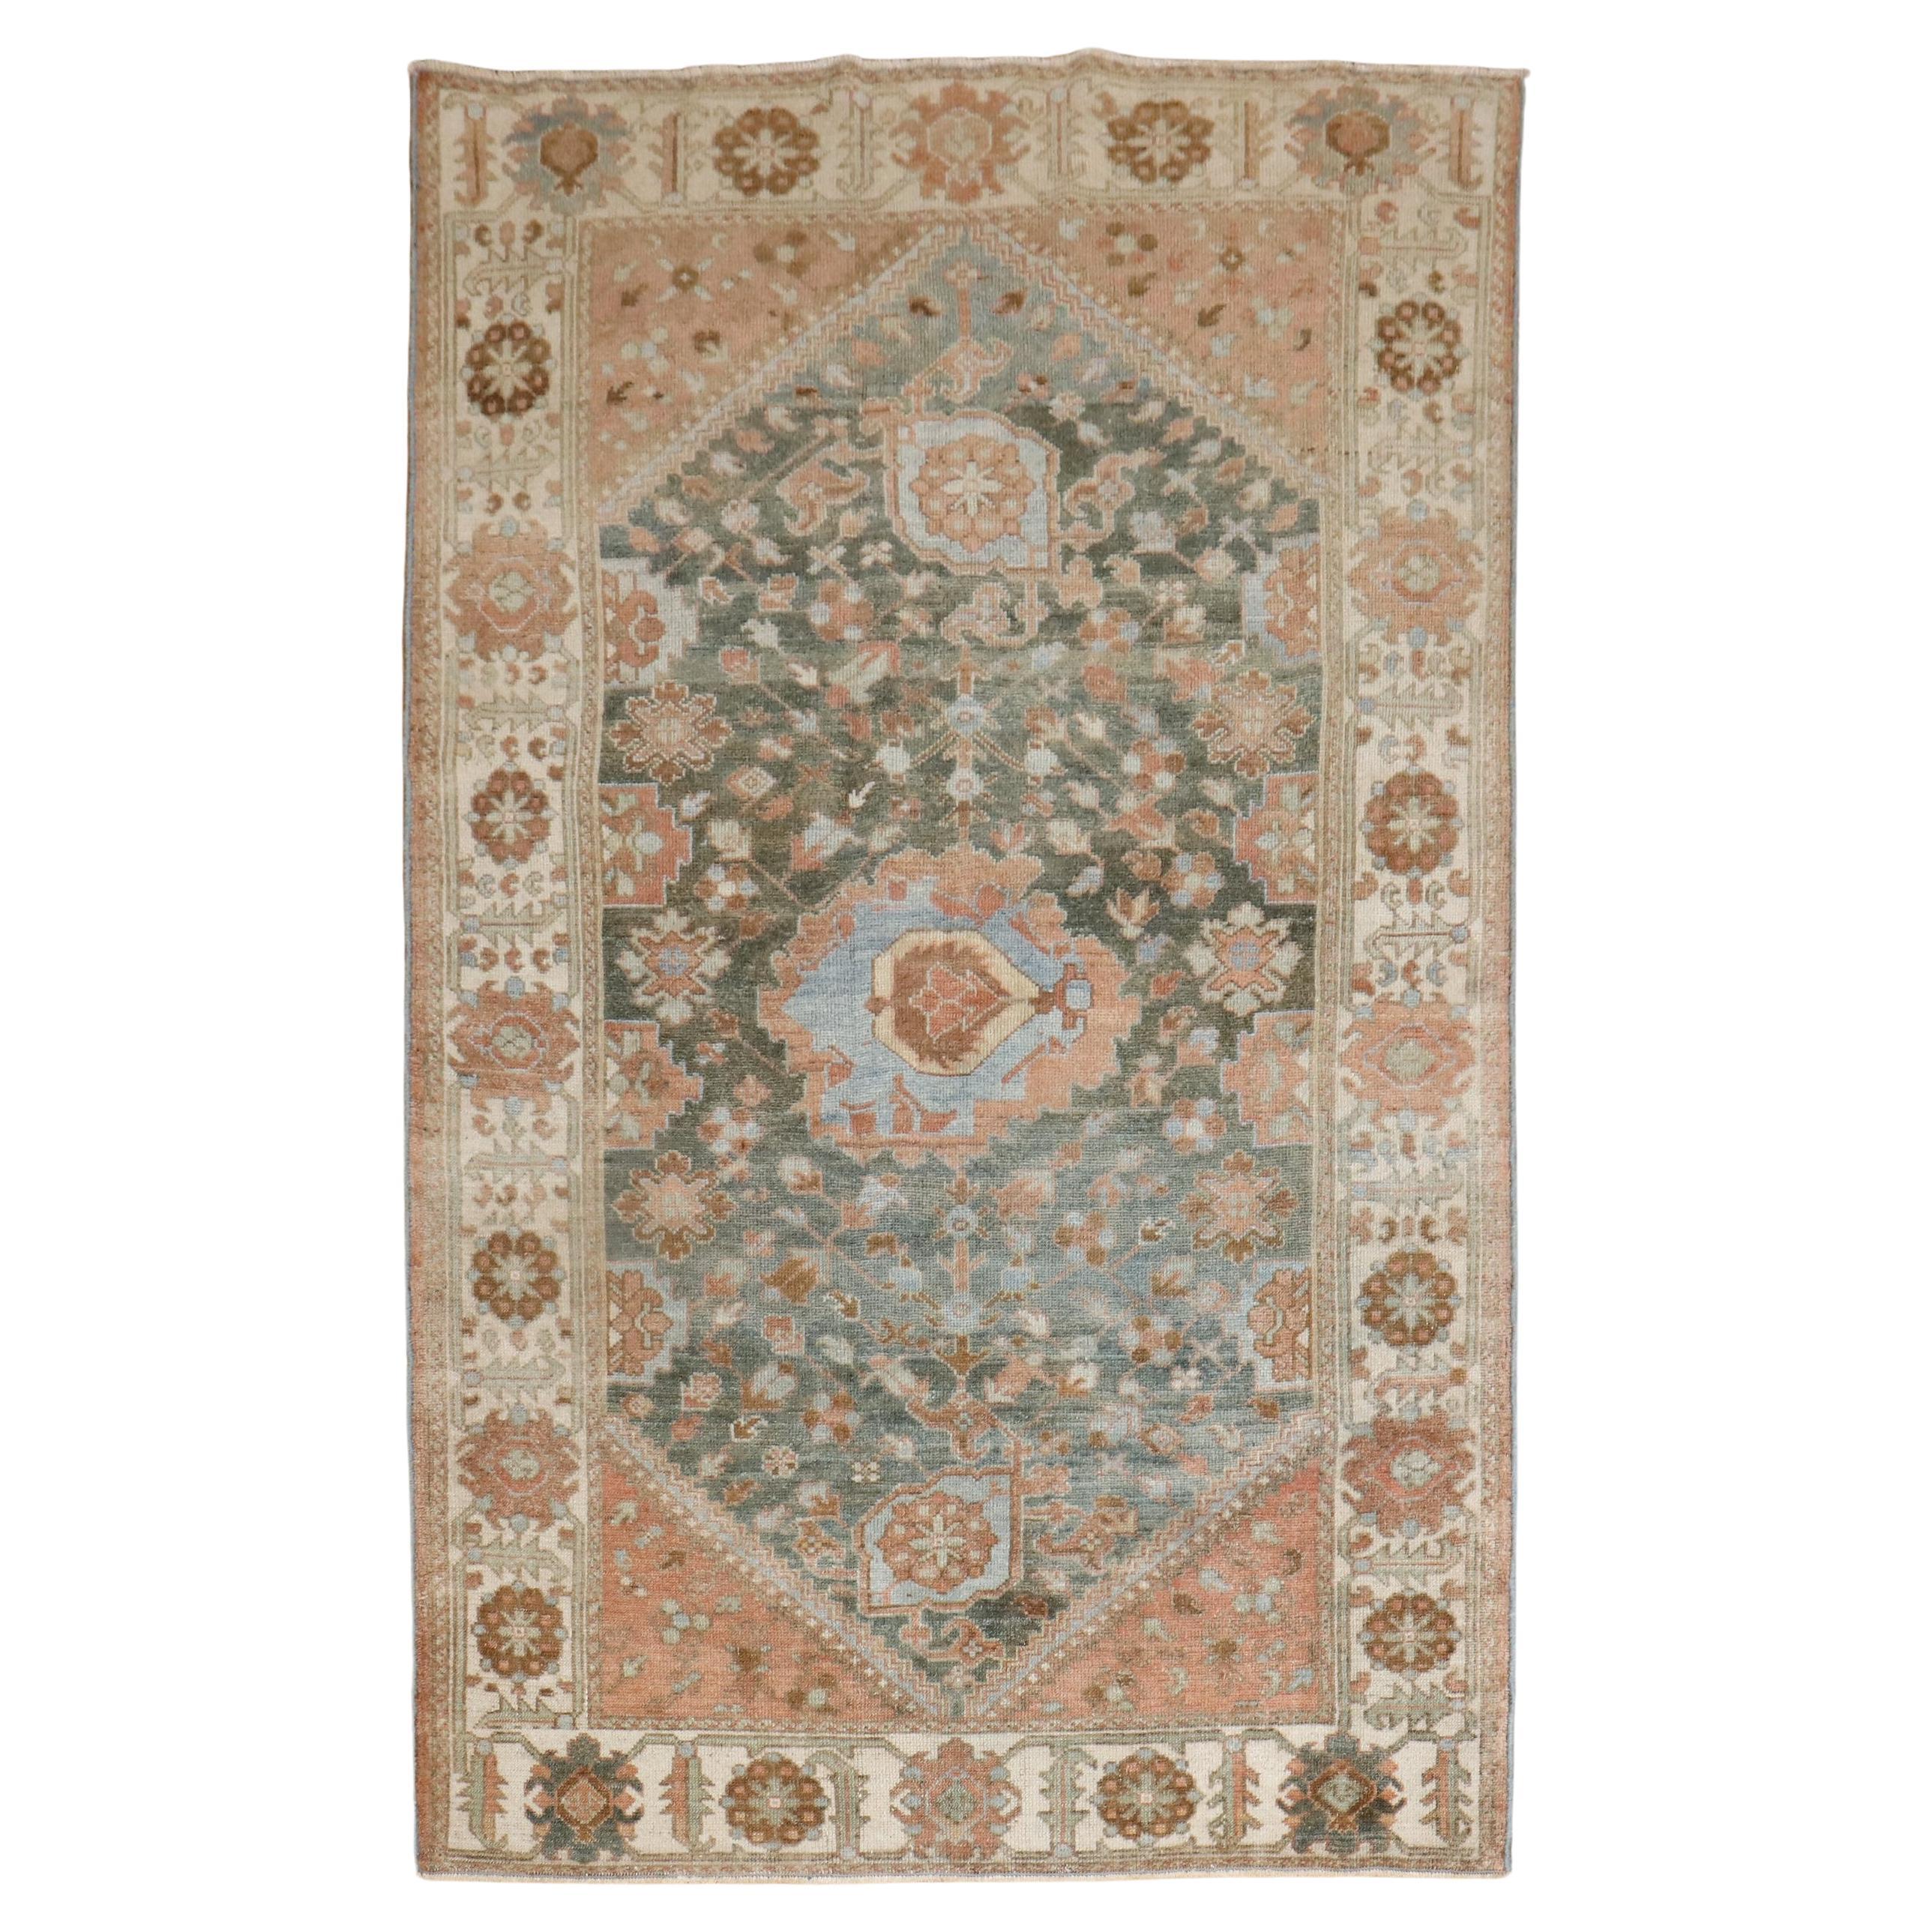 What is accent rug?